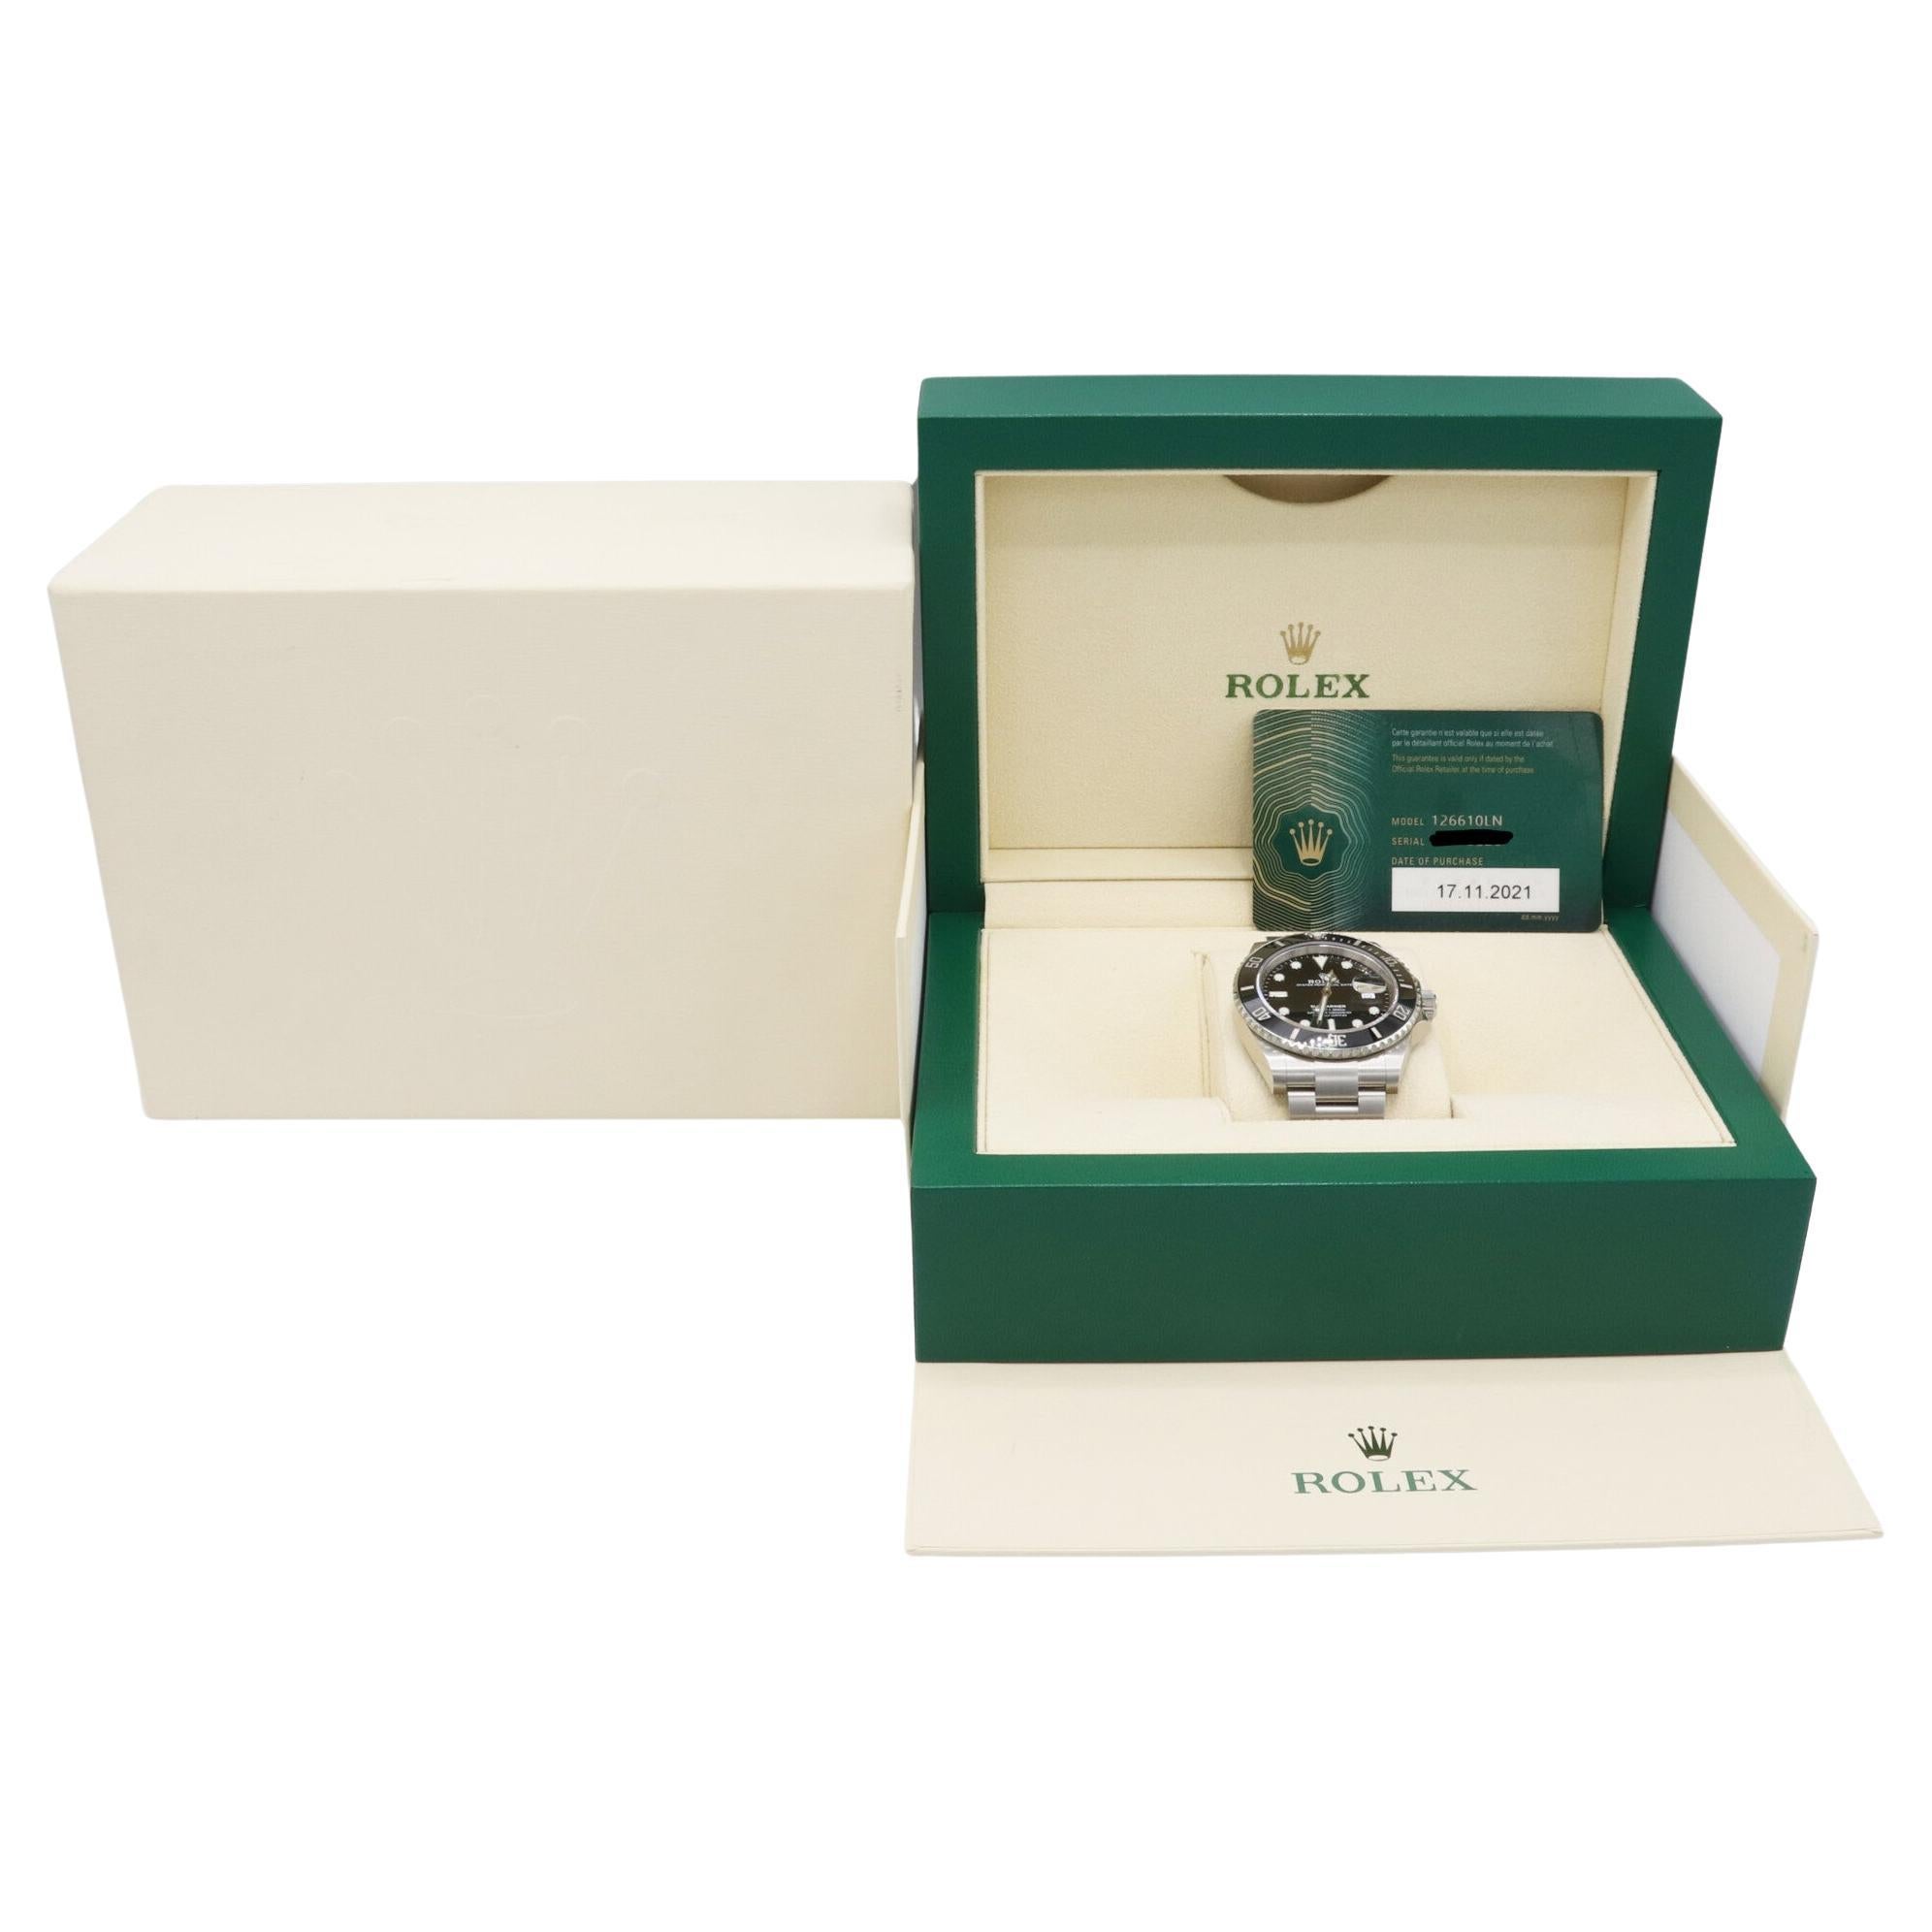 Rolex Submariner Date 126610LN Stainless Steel Watch Box  Papers
Model: 126610LN
Serial: 578P**** (Card dated 2021)
Metal: Stainless steel
Dial: Black
Case: 41mm
Bracelet: Oyster, fits approx. 8 inch wrist when clasped, 11 links
Bezel: Black,